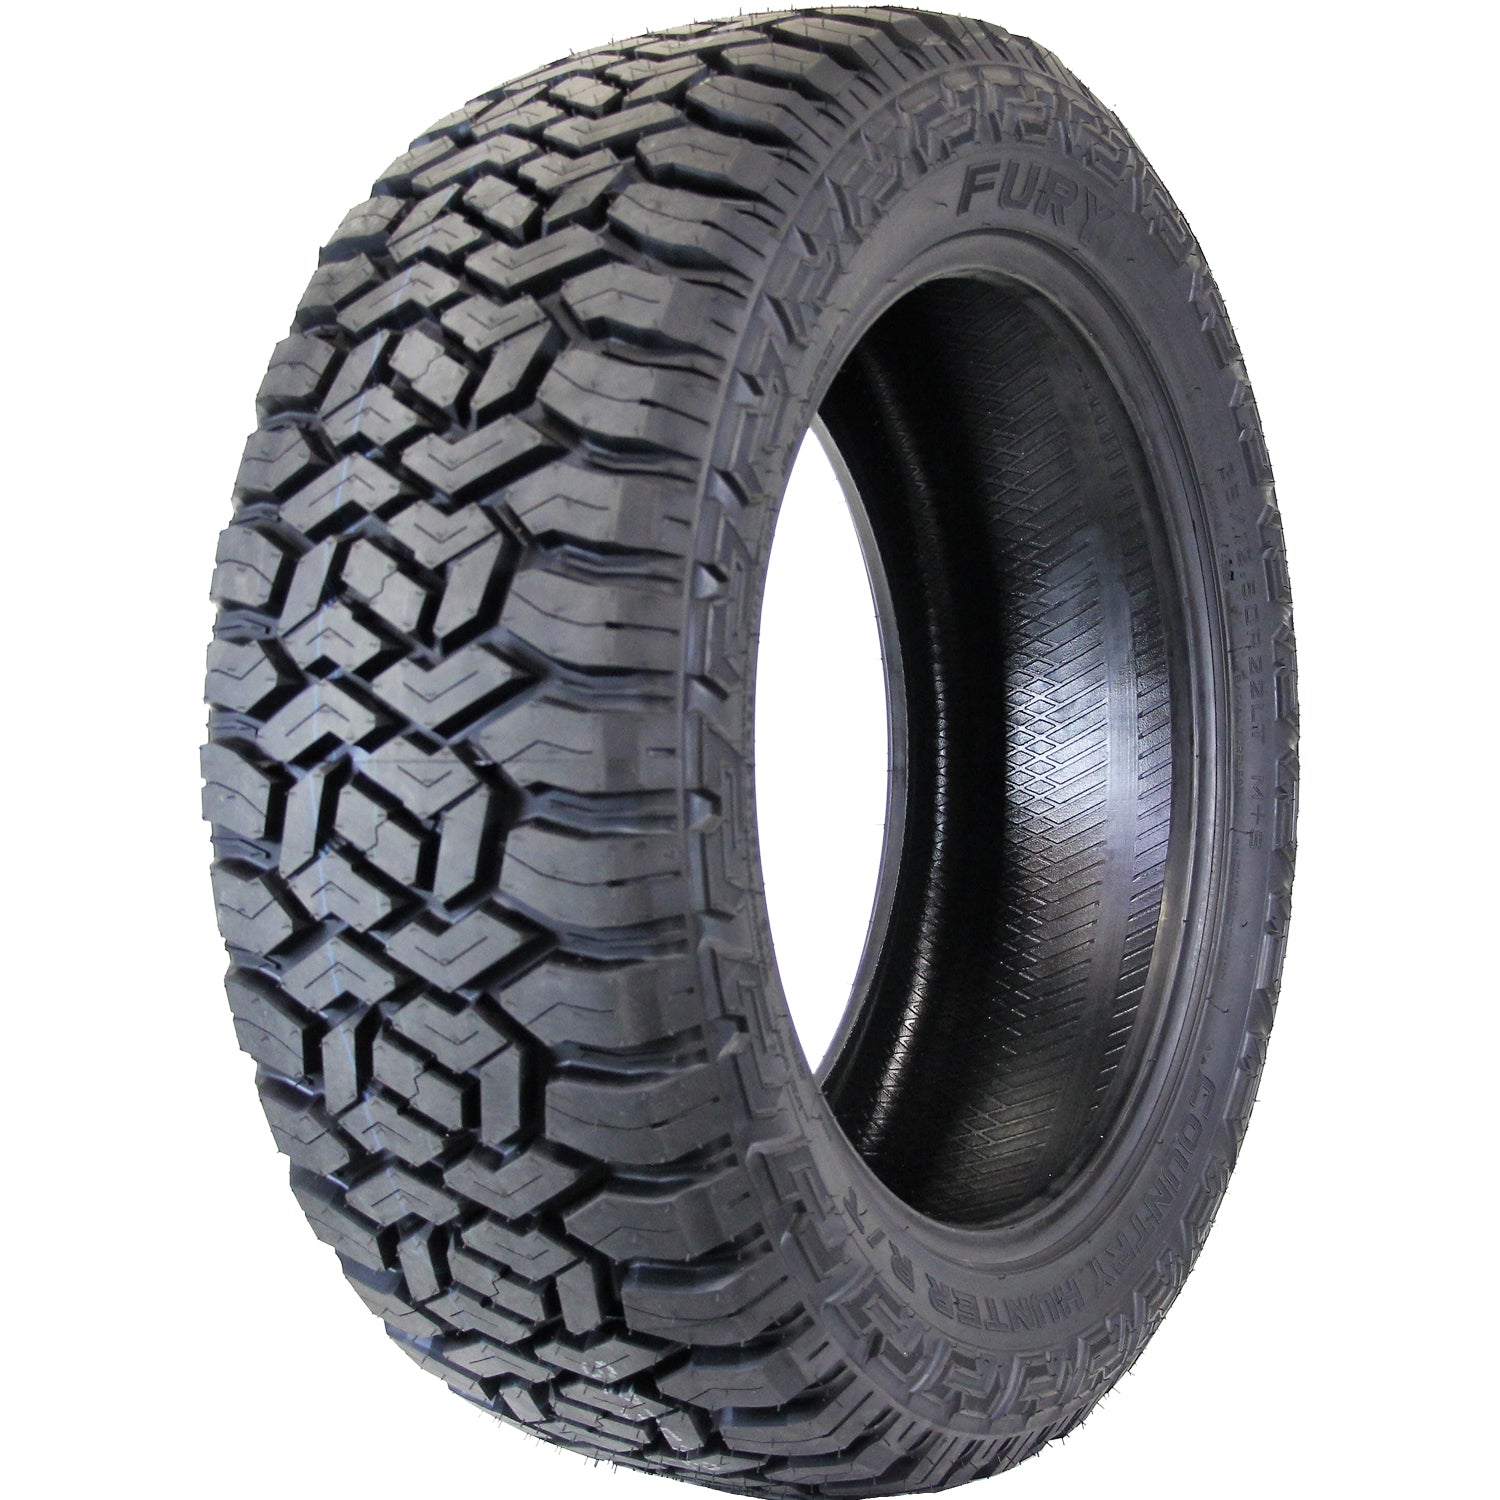 FURY OFFROAD COUNTRY HUNTER RT 37X13.50R18LT Tires